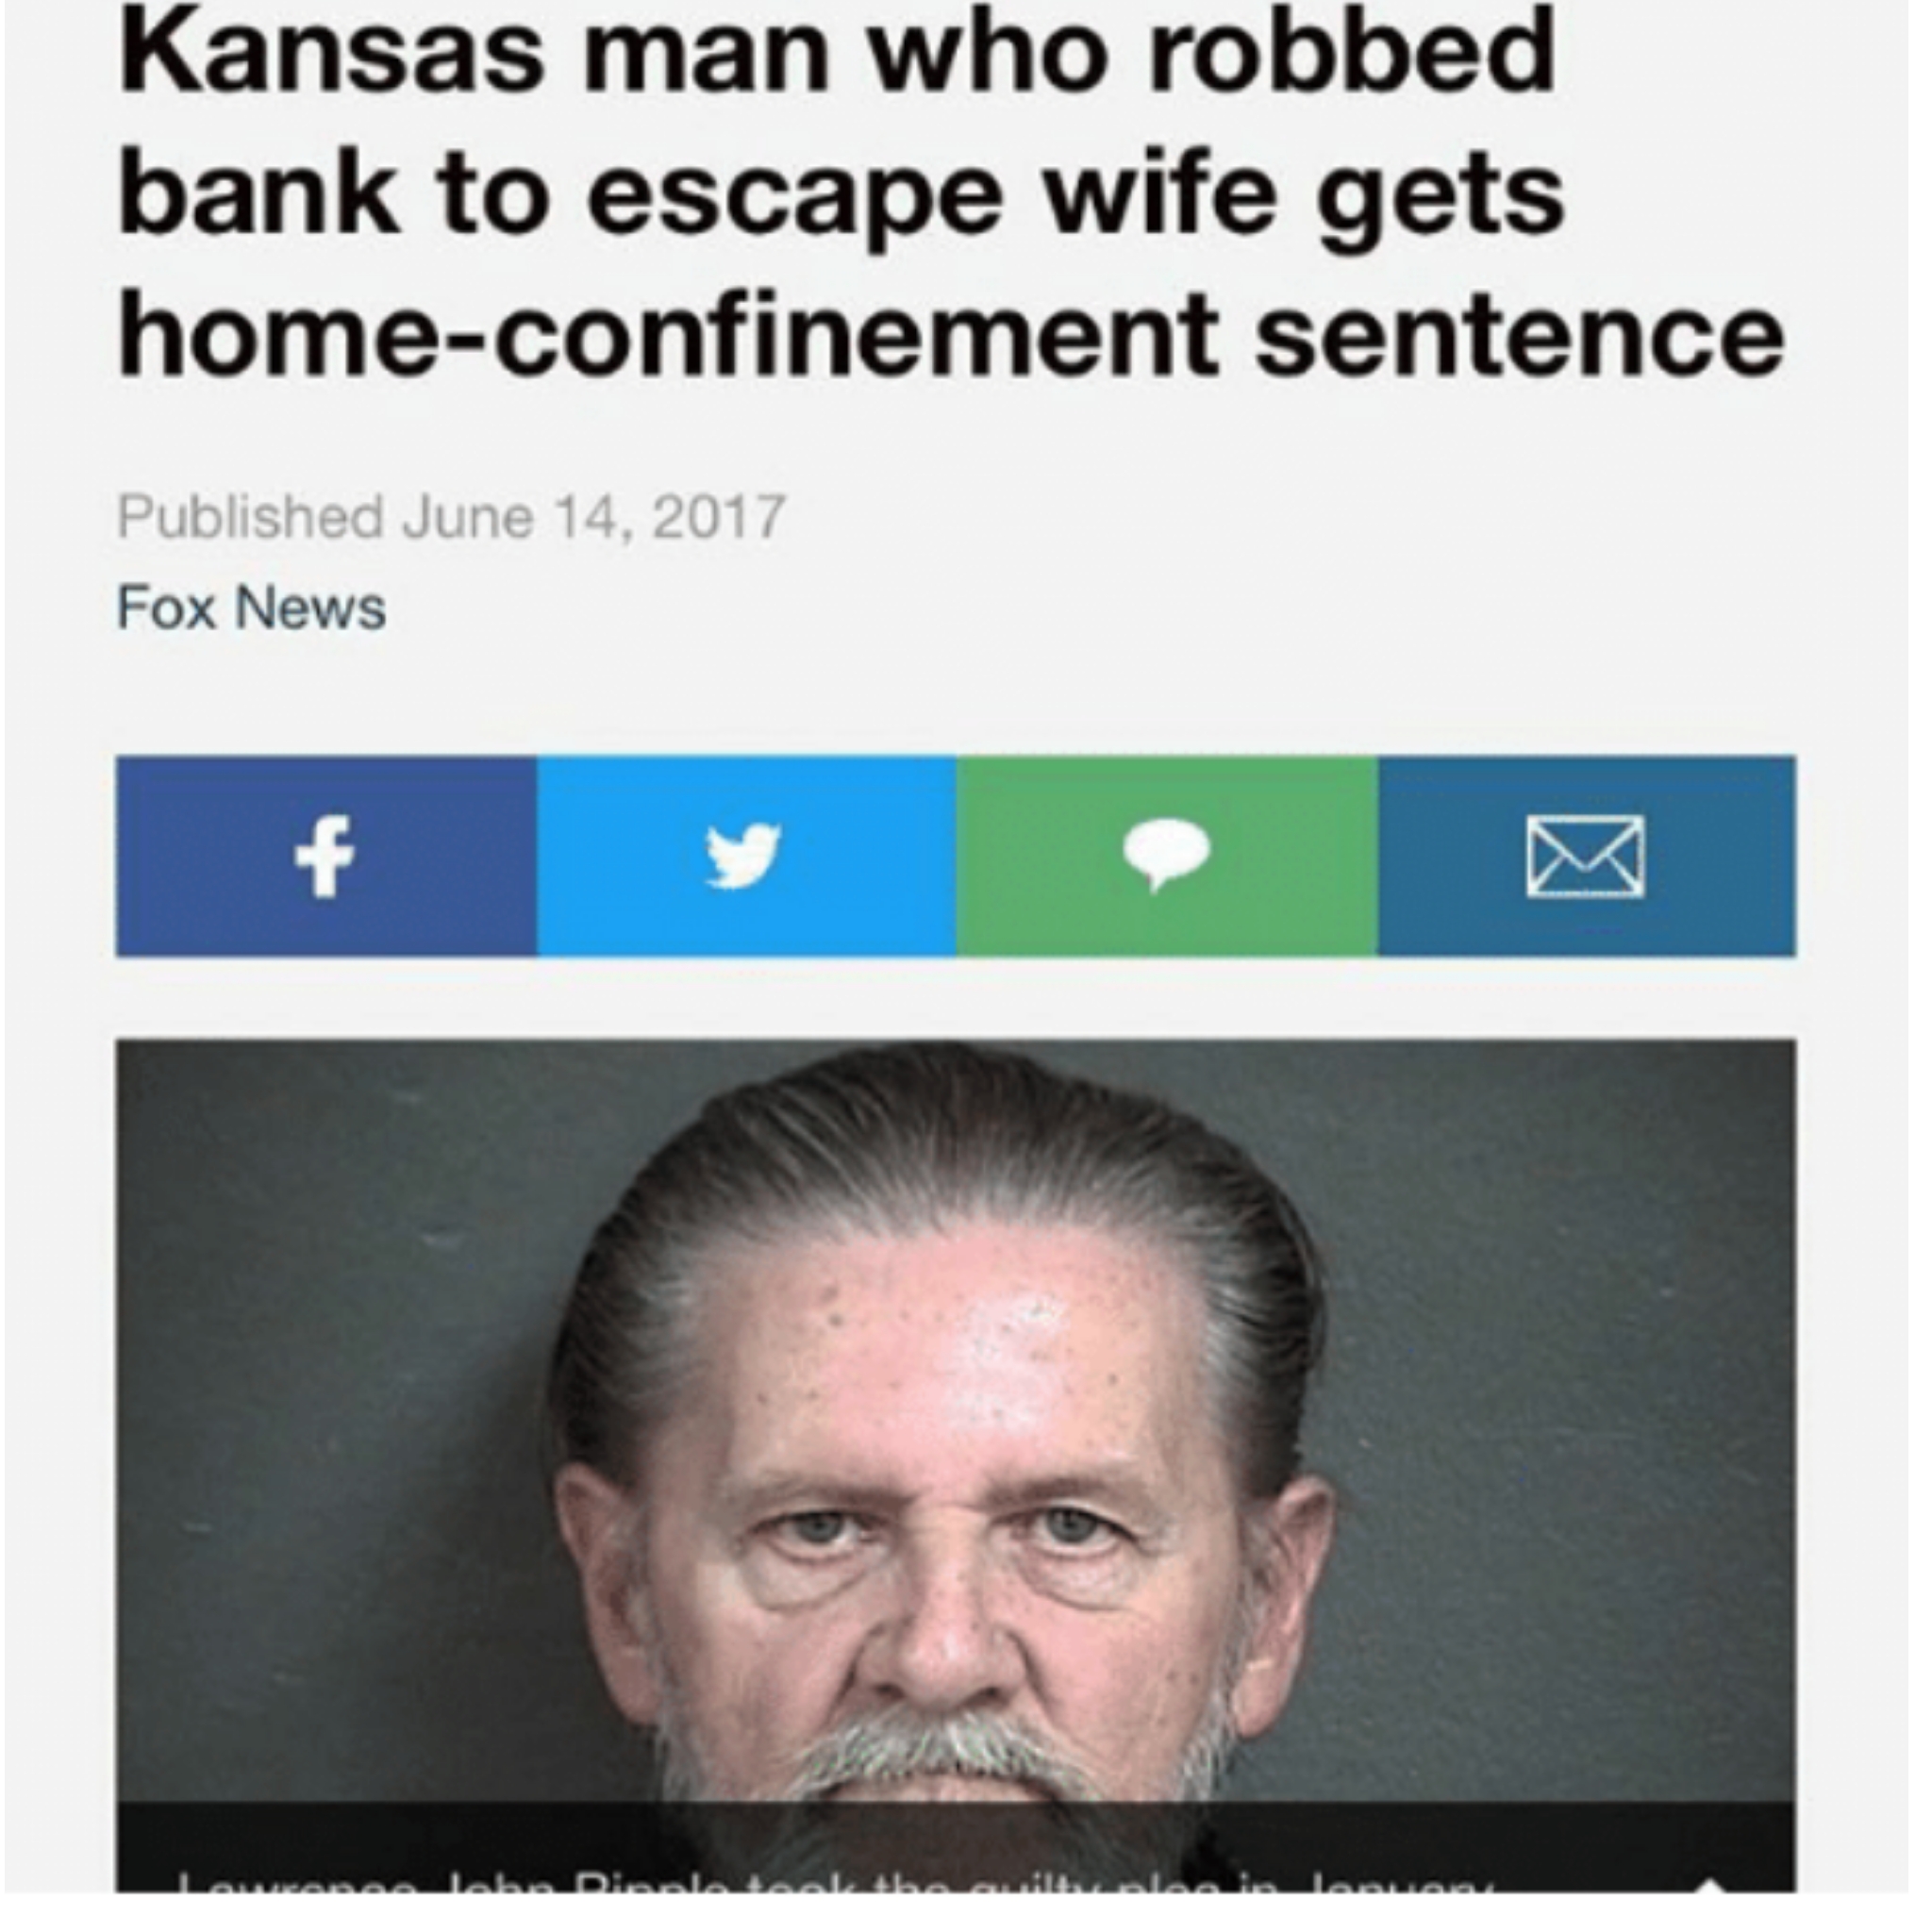 florida arrests funny - Kansas man who robbed bank to escape wife gets homeconfinement sentence Published Fox News f